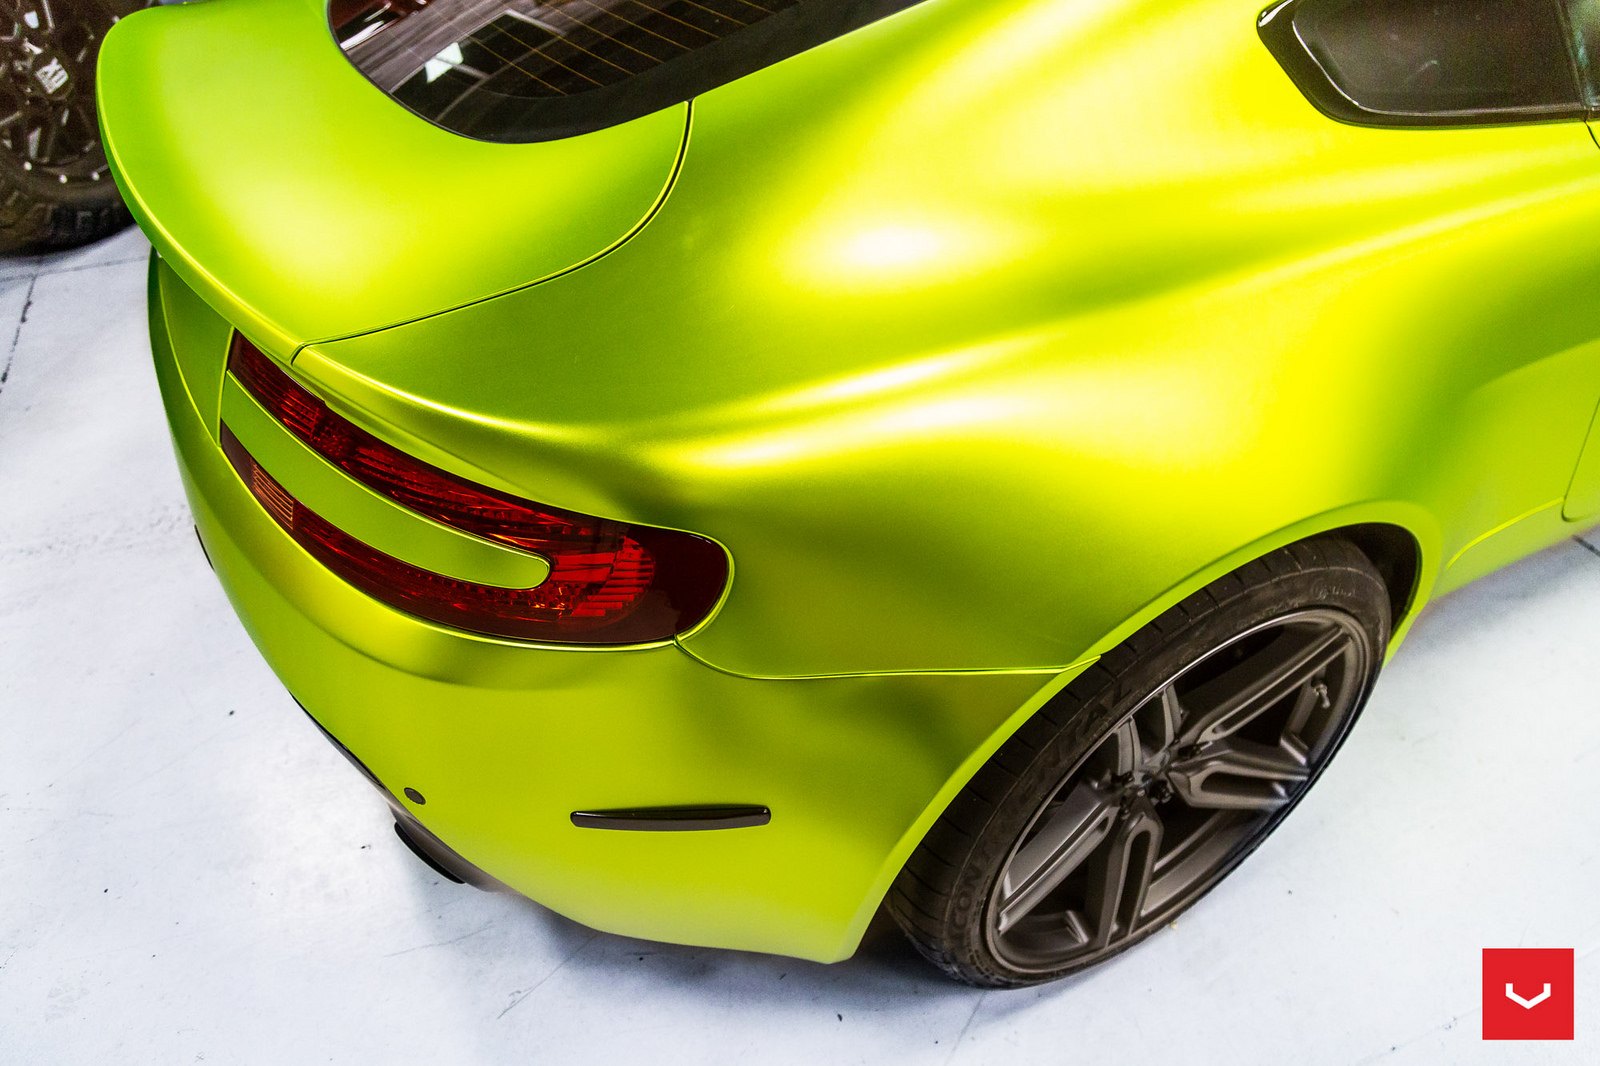 Lime Green Aston Martin Vantage with Aftermarket Rear Diffuser - Photo by Vossen